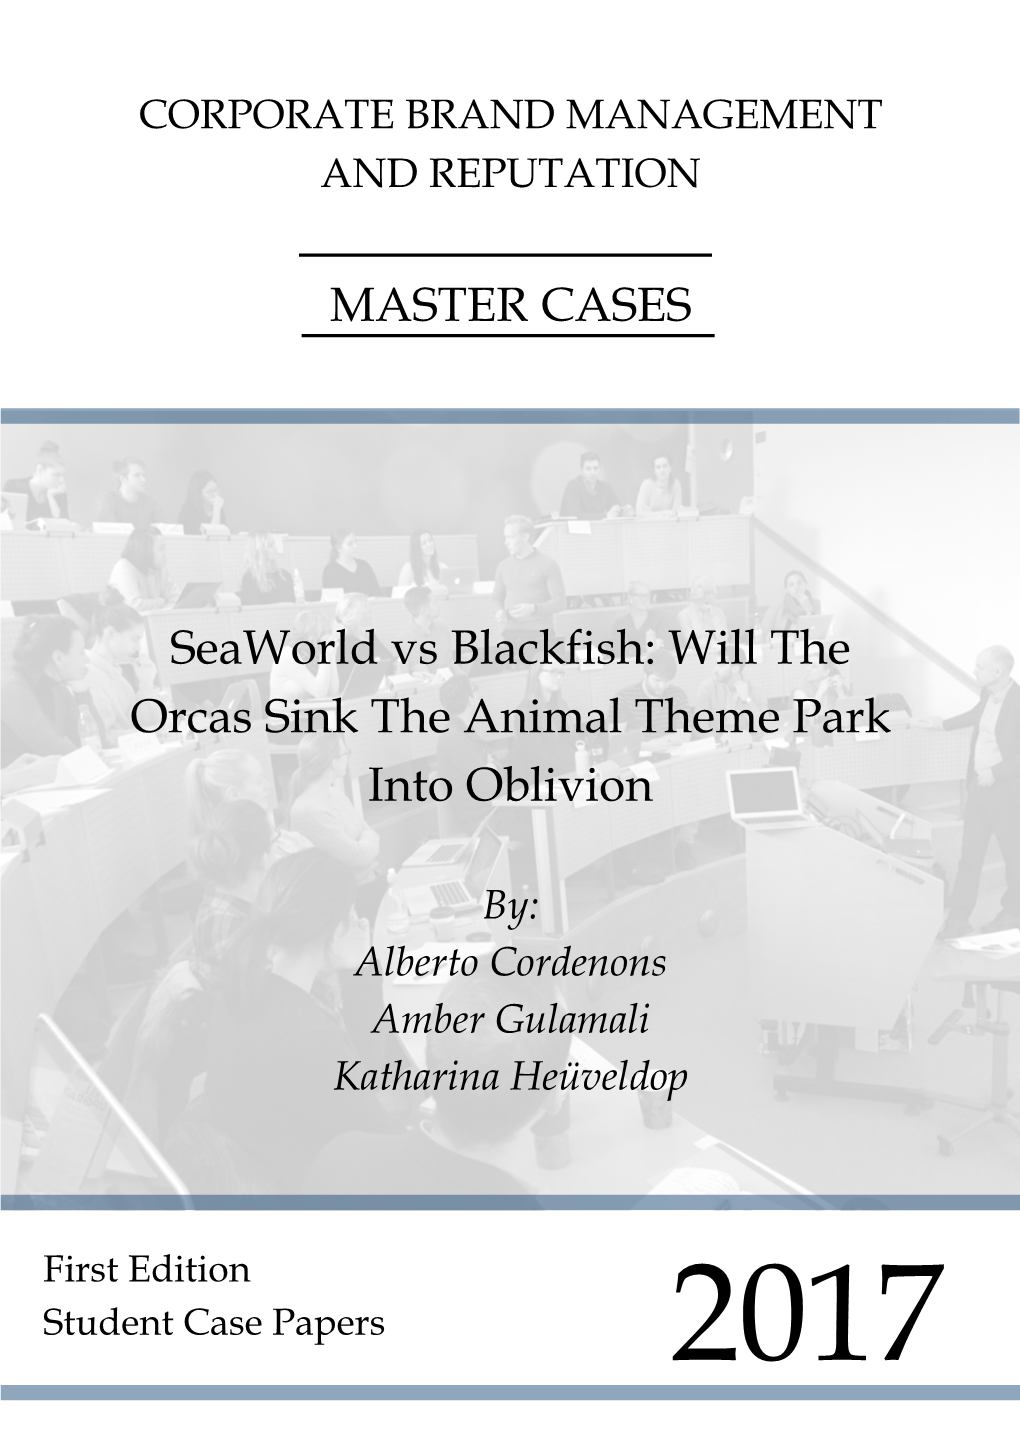 MASTER CASES Seaworld Vs Blackfish: Will the Orcas Sink The